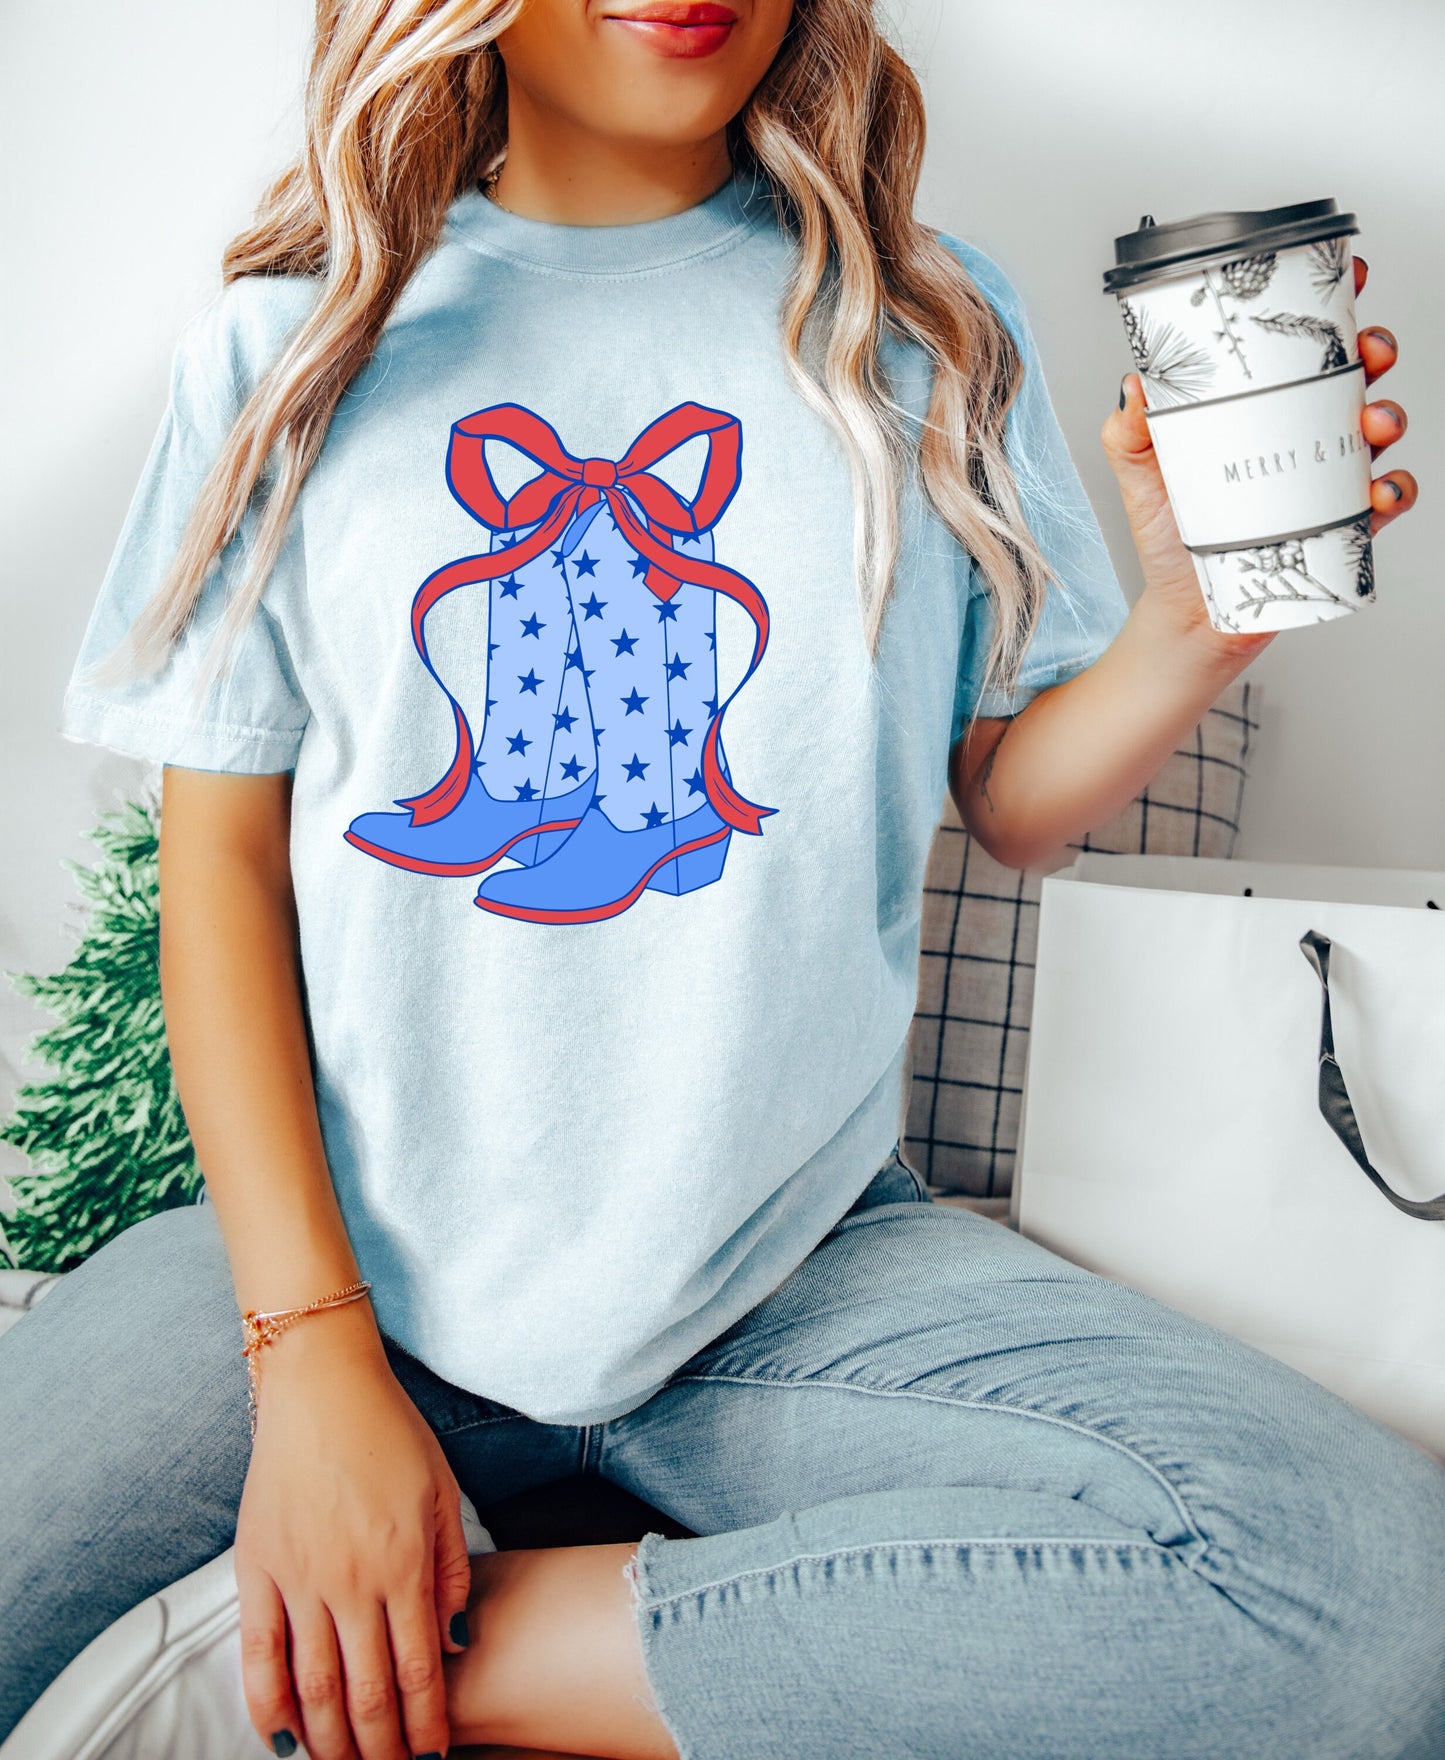 Cowgirl Boots July 4th Shirt, Coquette 4th of July Shirt, Retro 4th of July Shirt, Comfort Colors® Shirt, Summertime Tee, Coquette Cowgirl